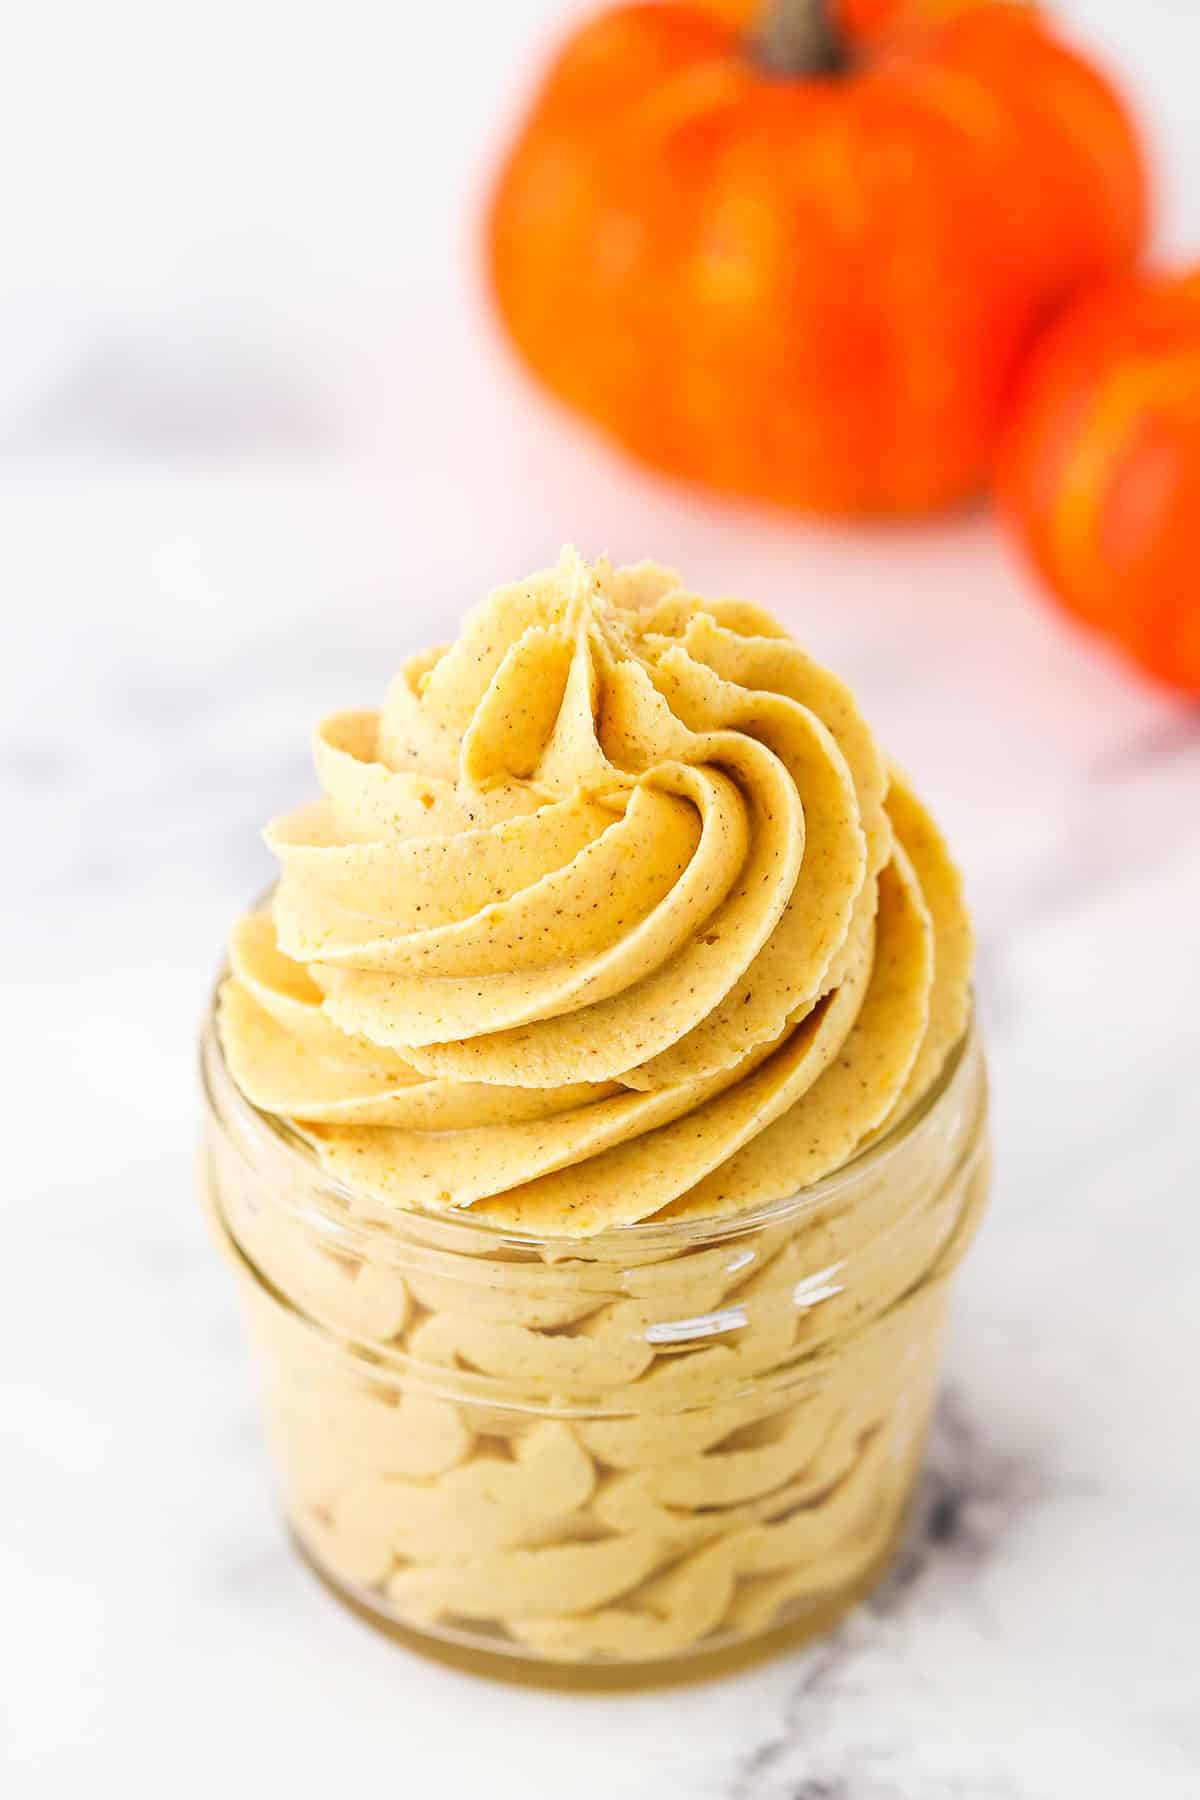 Pumpkin Spice Buttercream Frosting piped into a clear glass jar